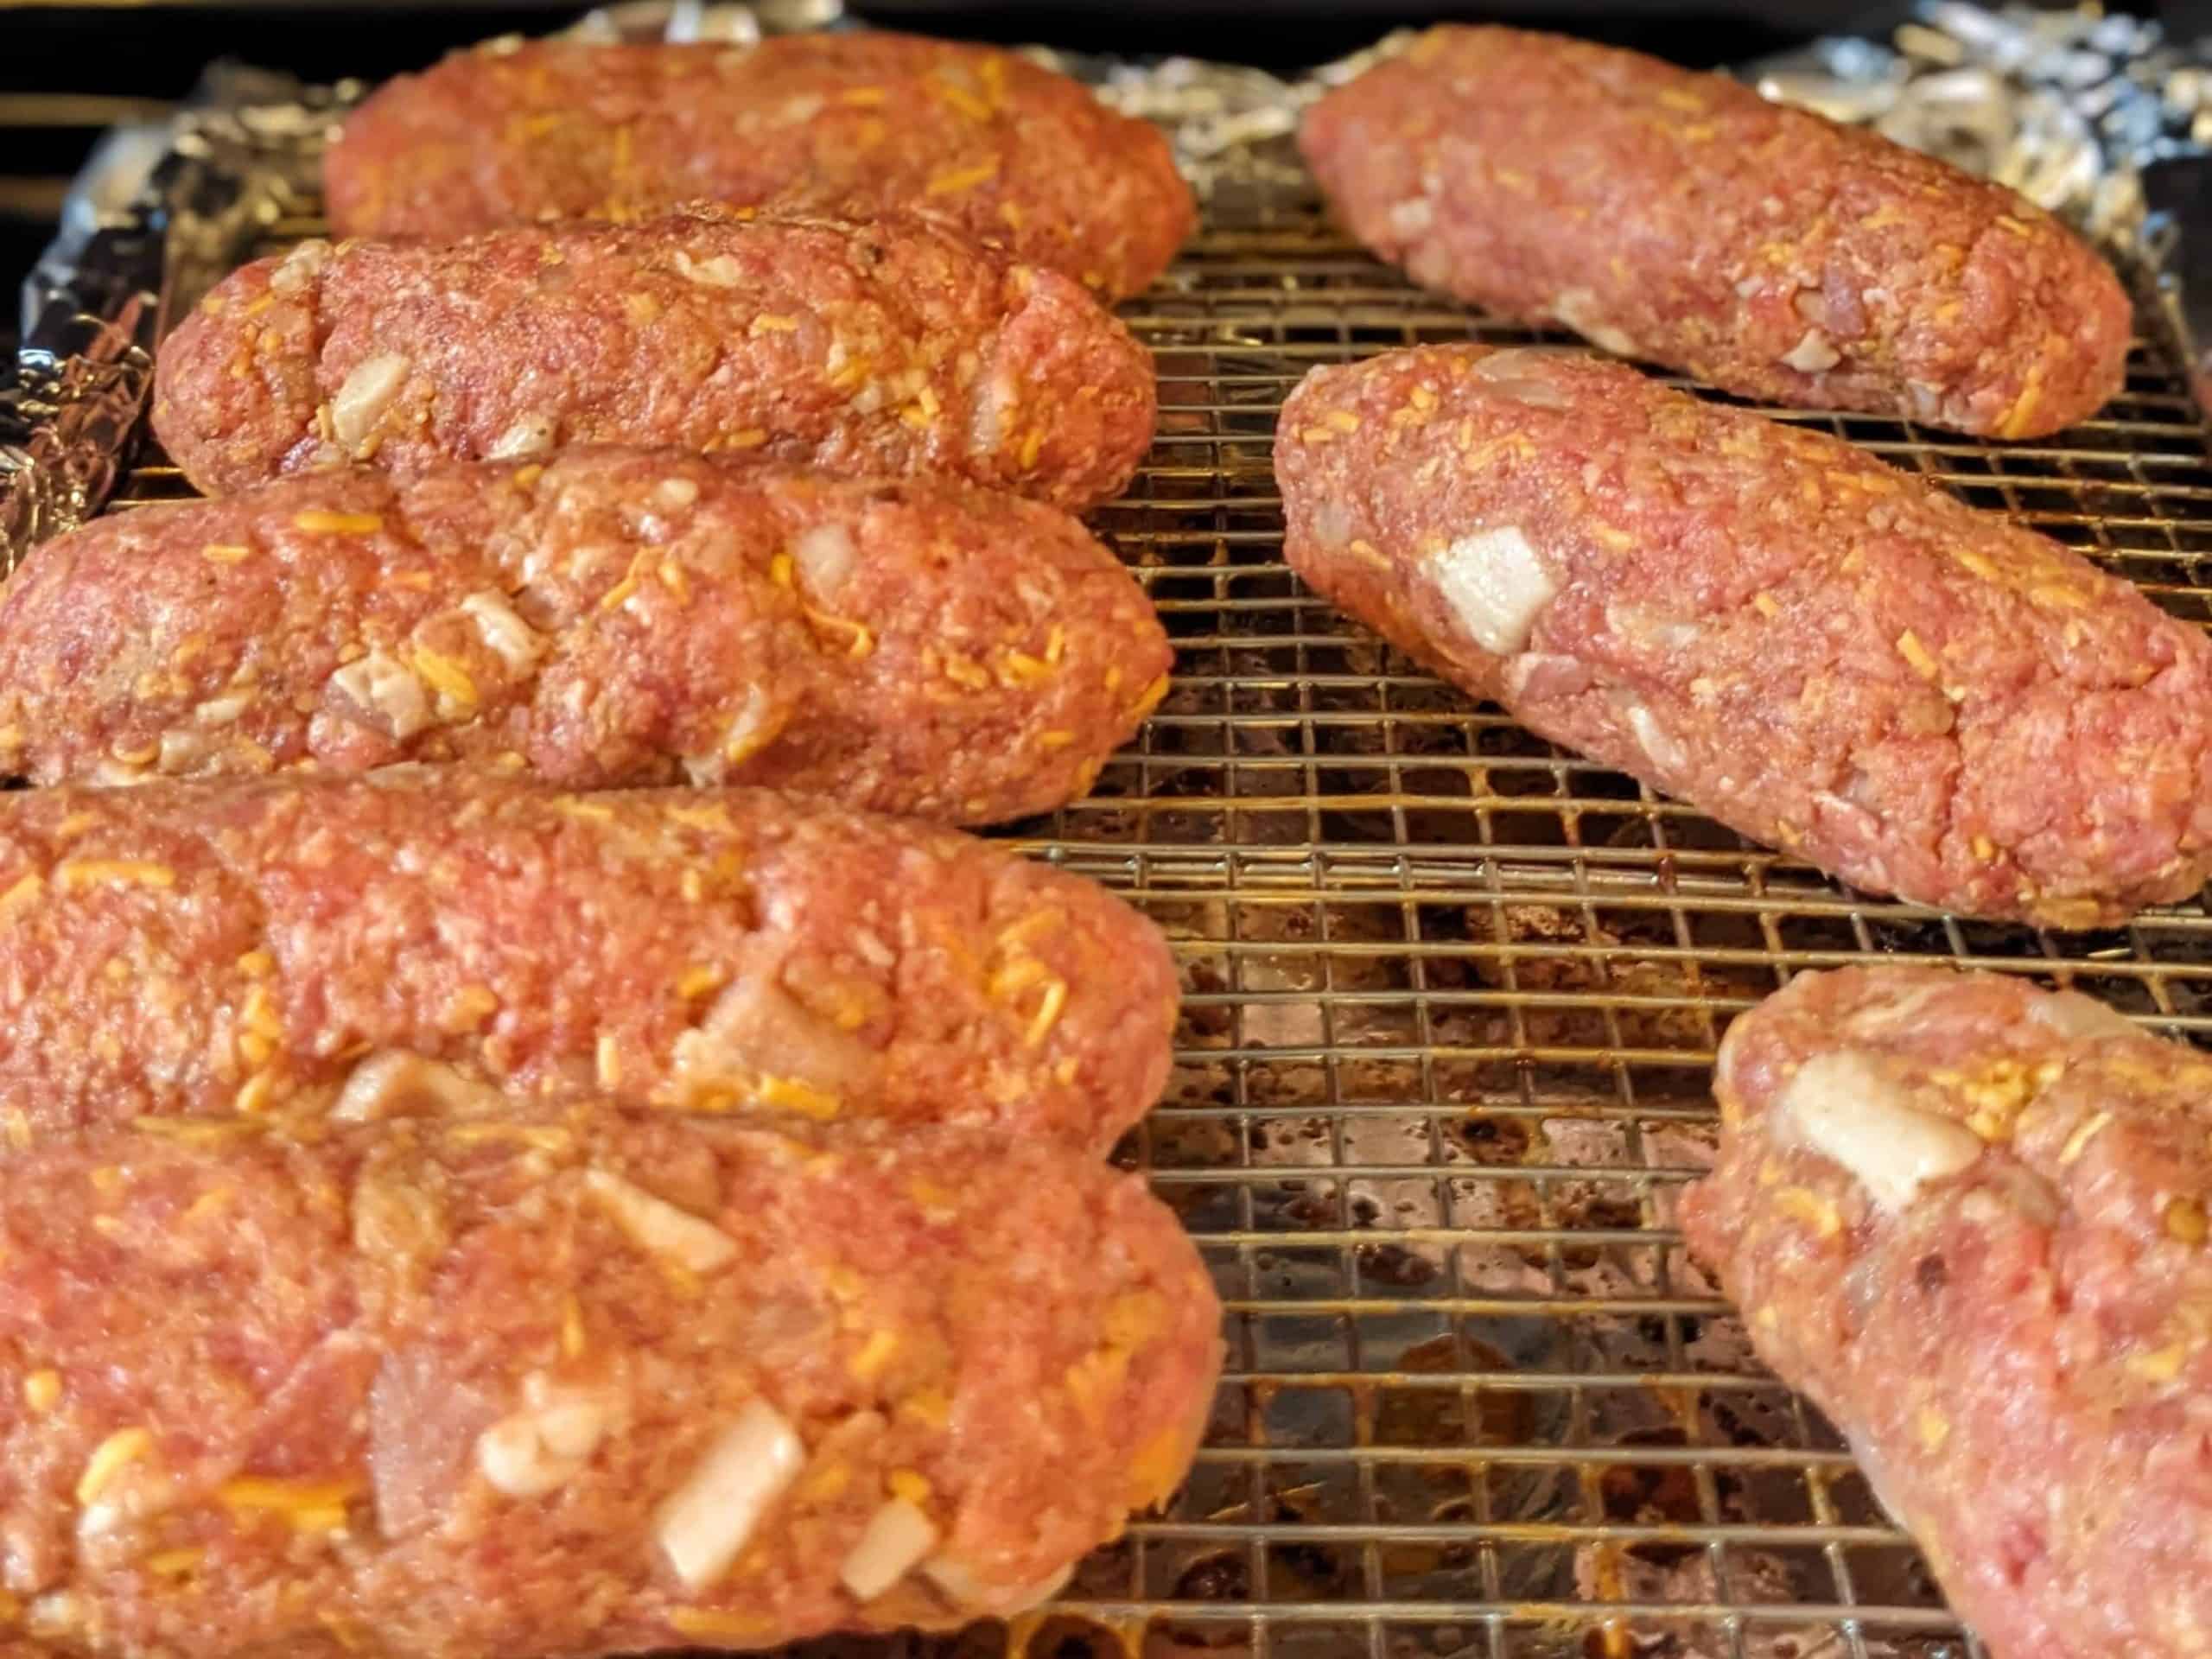 Uncooked personal-size meatloaves on a rack